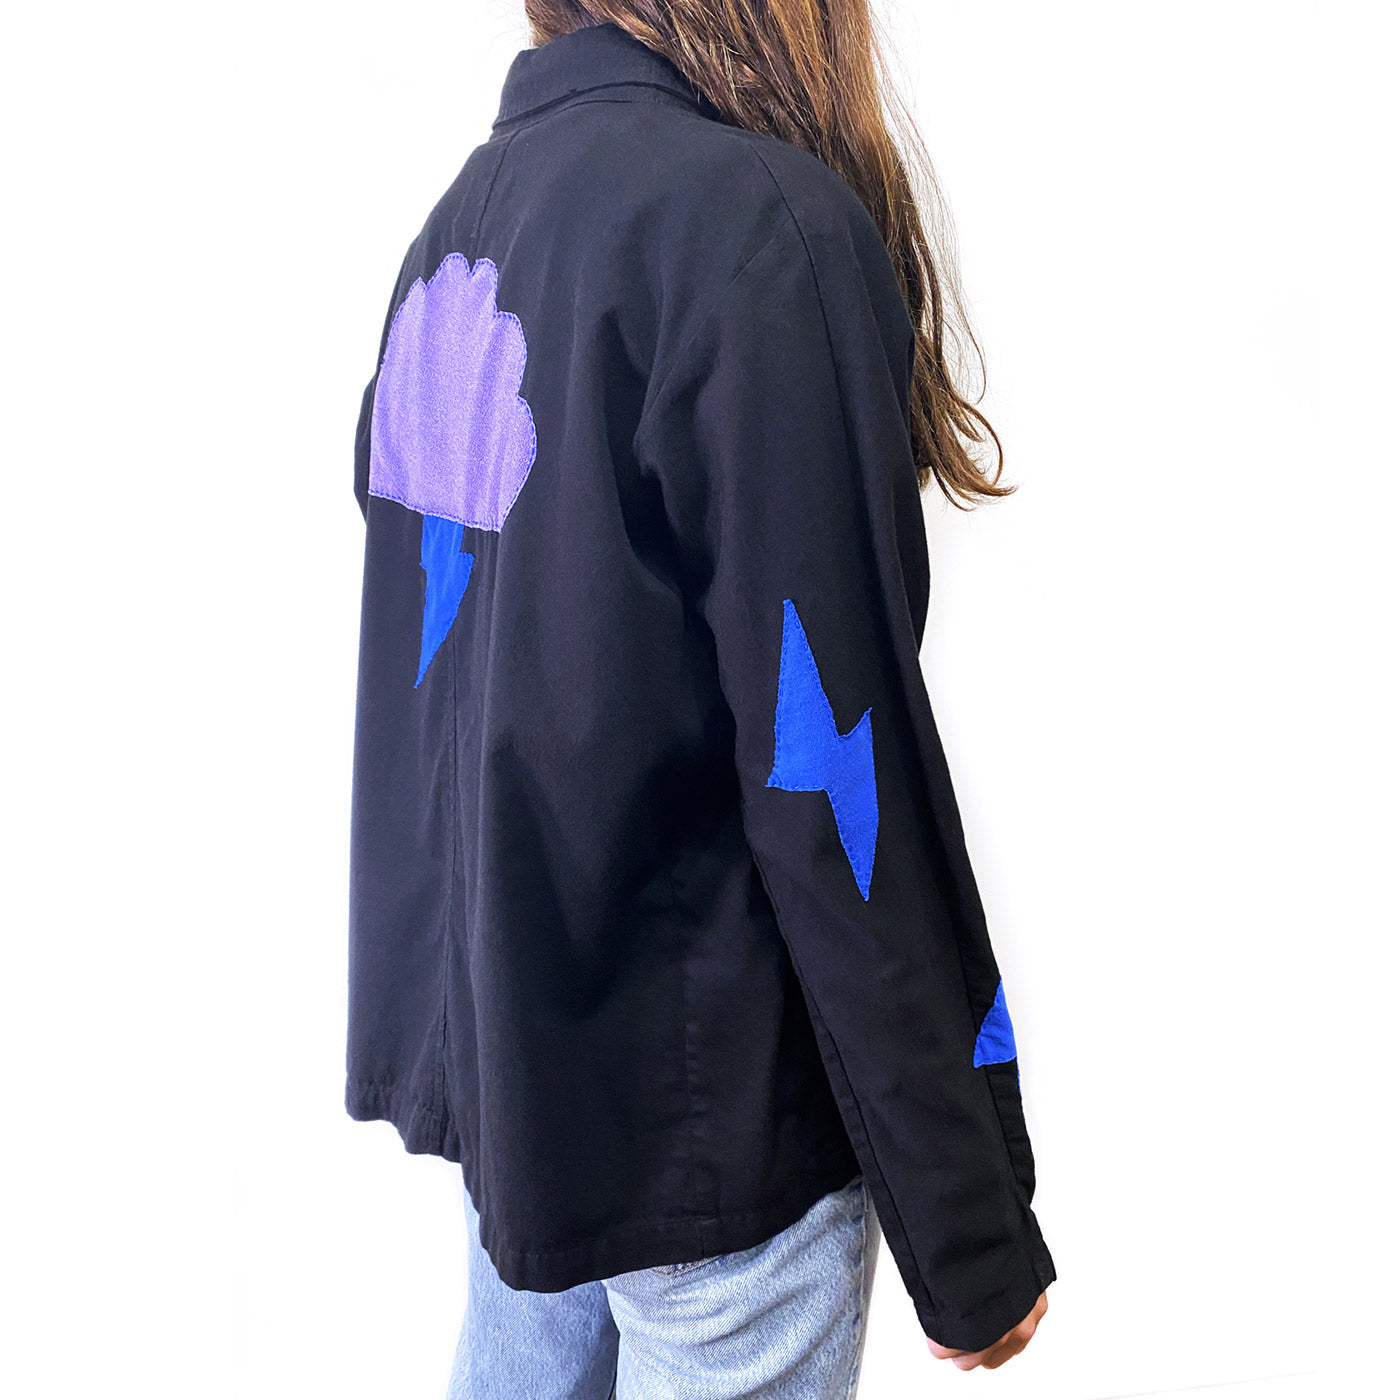 Side view of person with long brown hair wearing black jacket with handsewn designs in light purple and blue